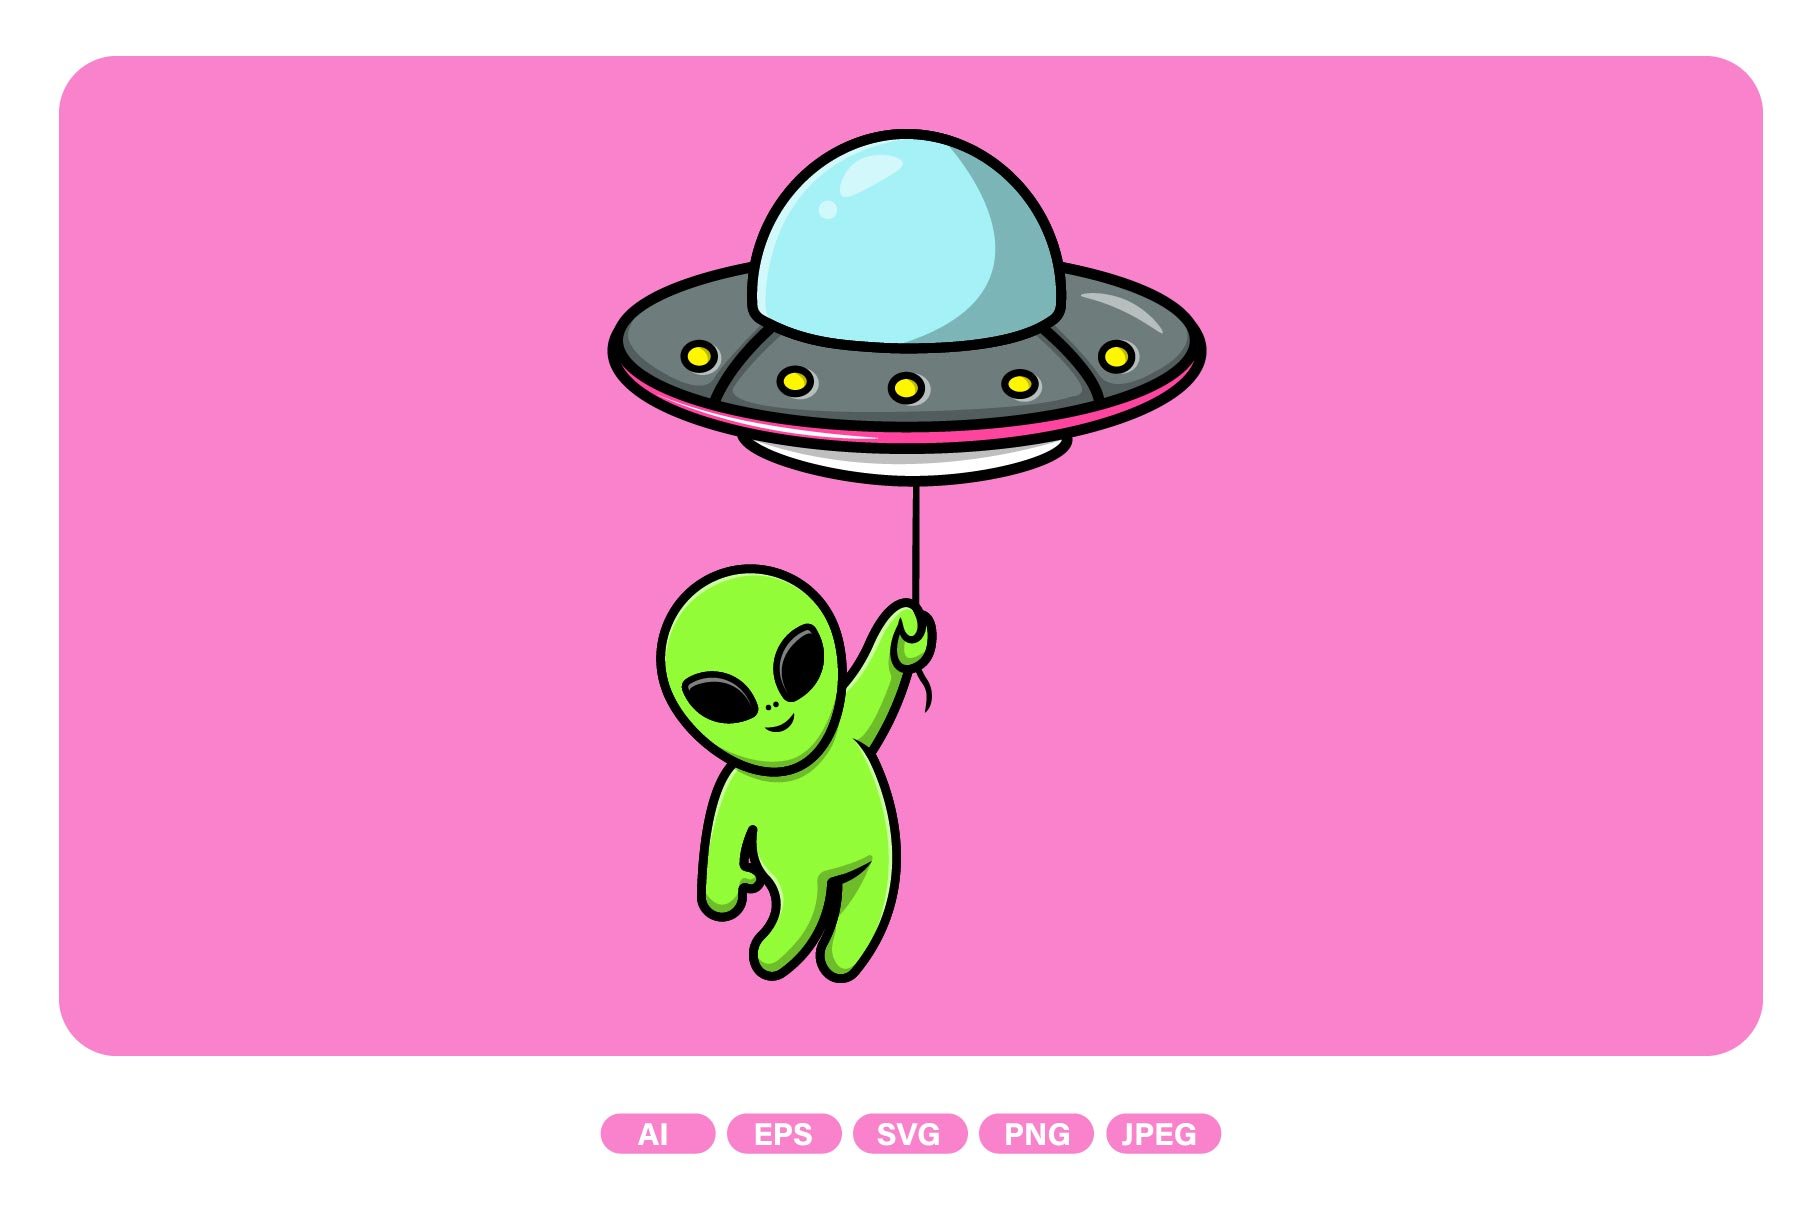 Cute Alien Floating With Ufo cover image.